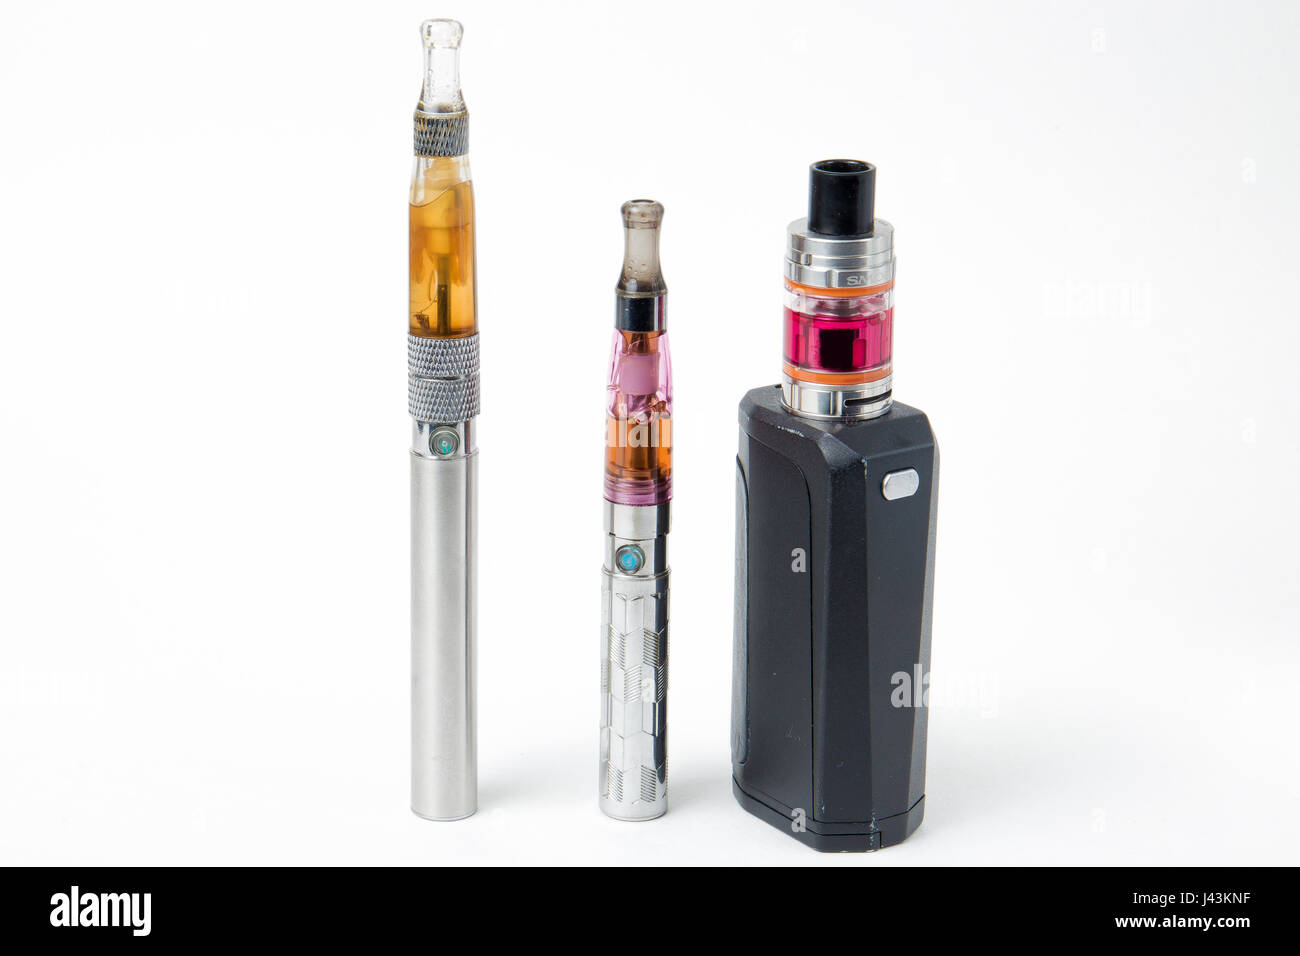 E-cigarettes, old and new one Stock Photo